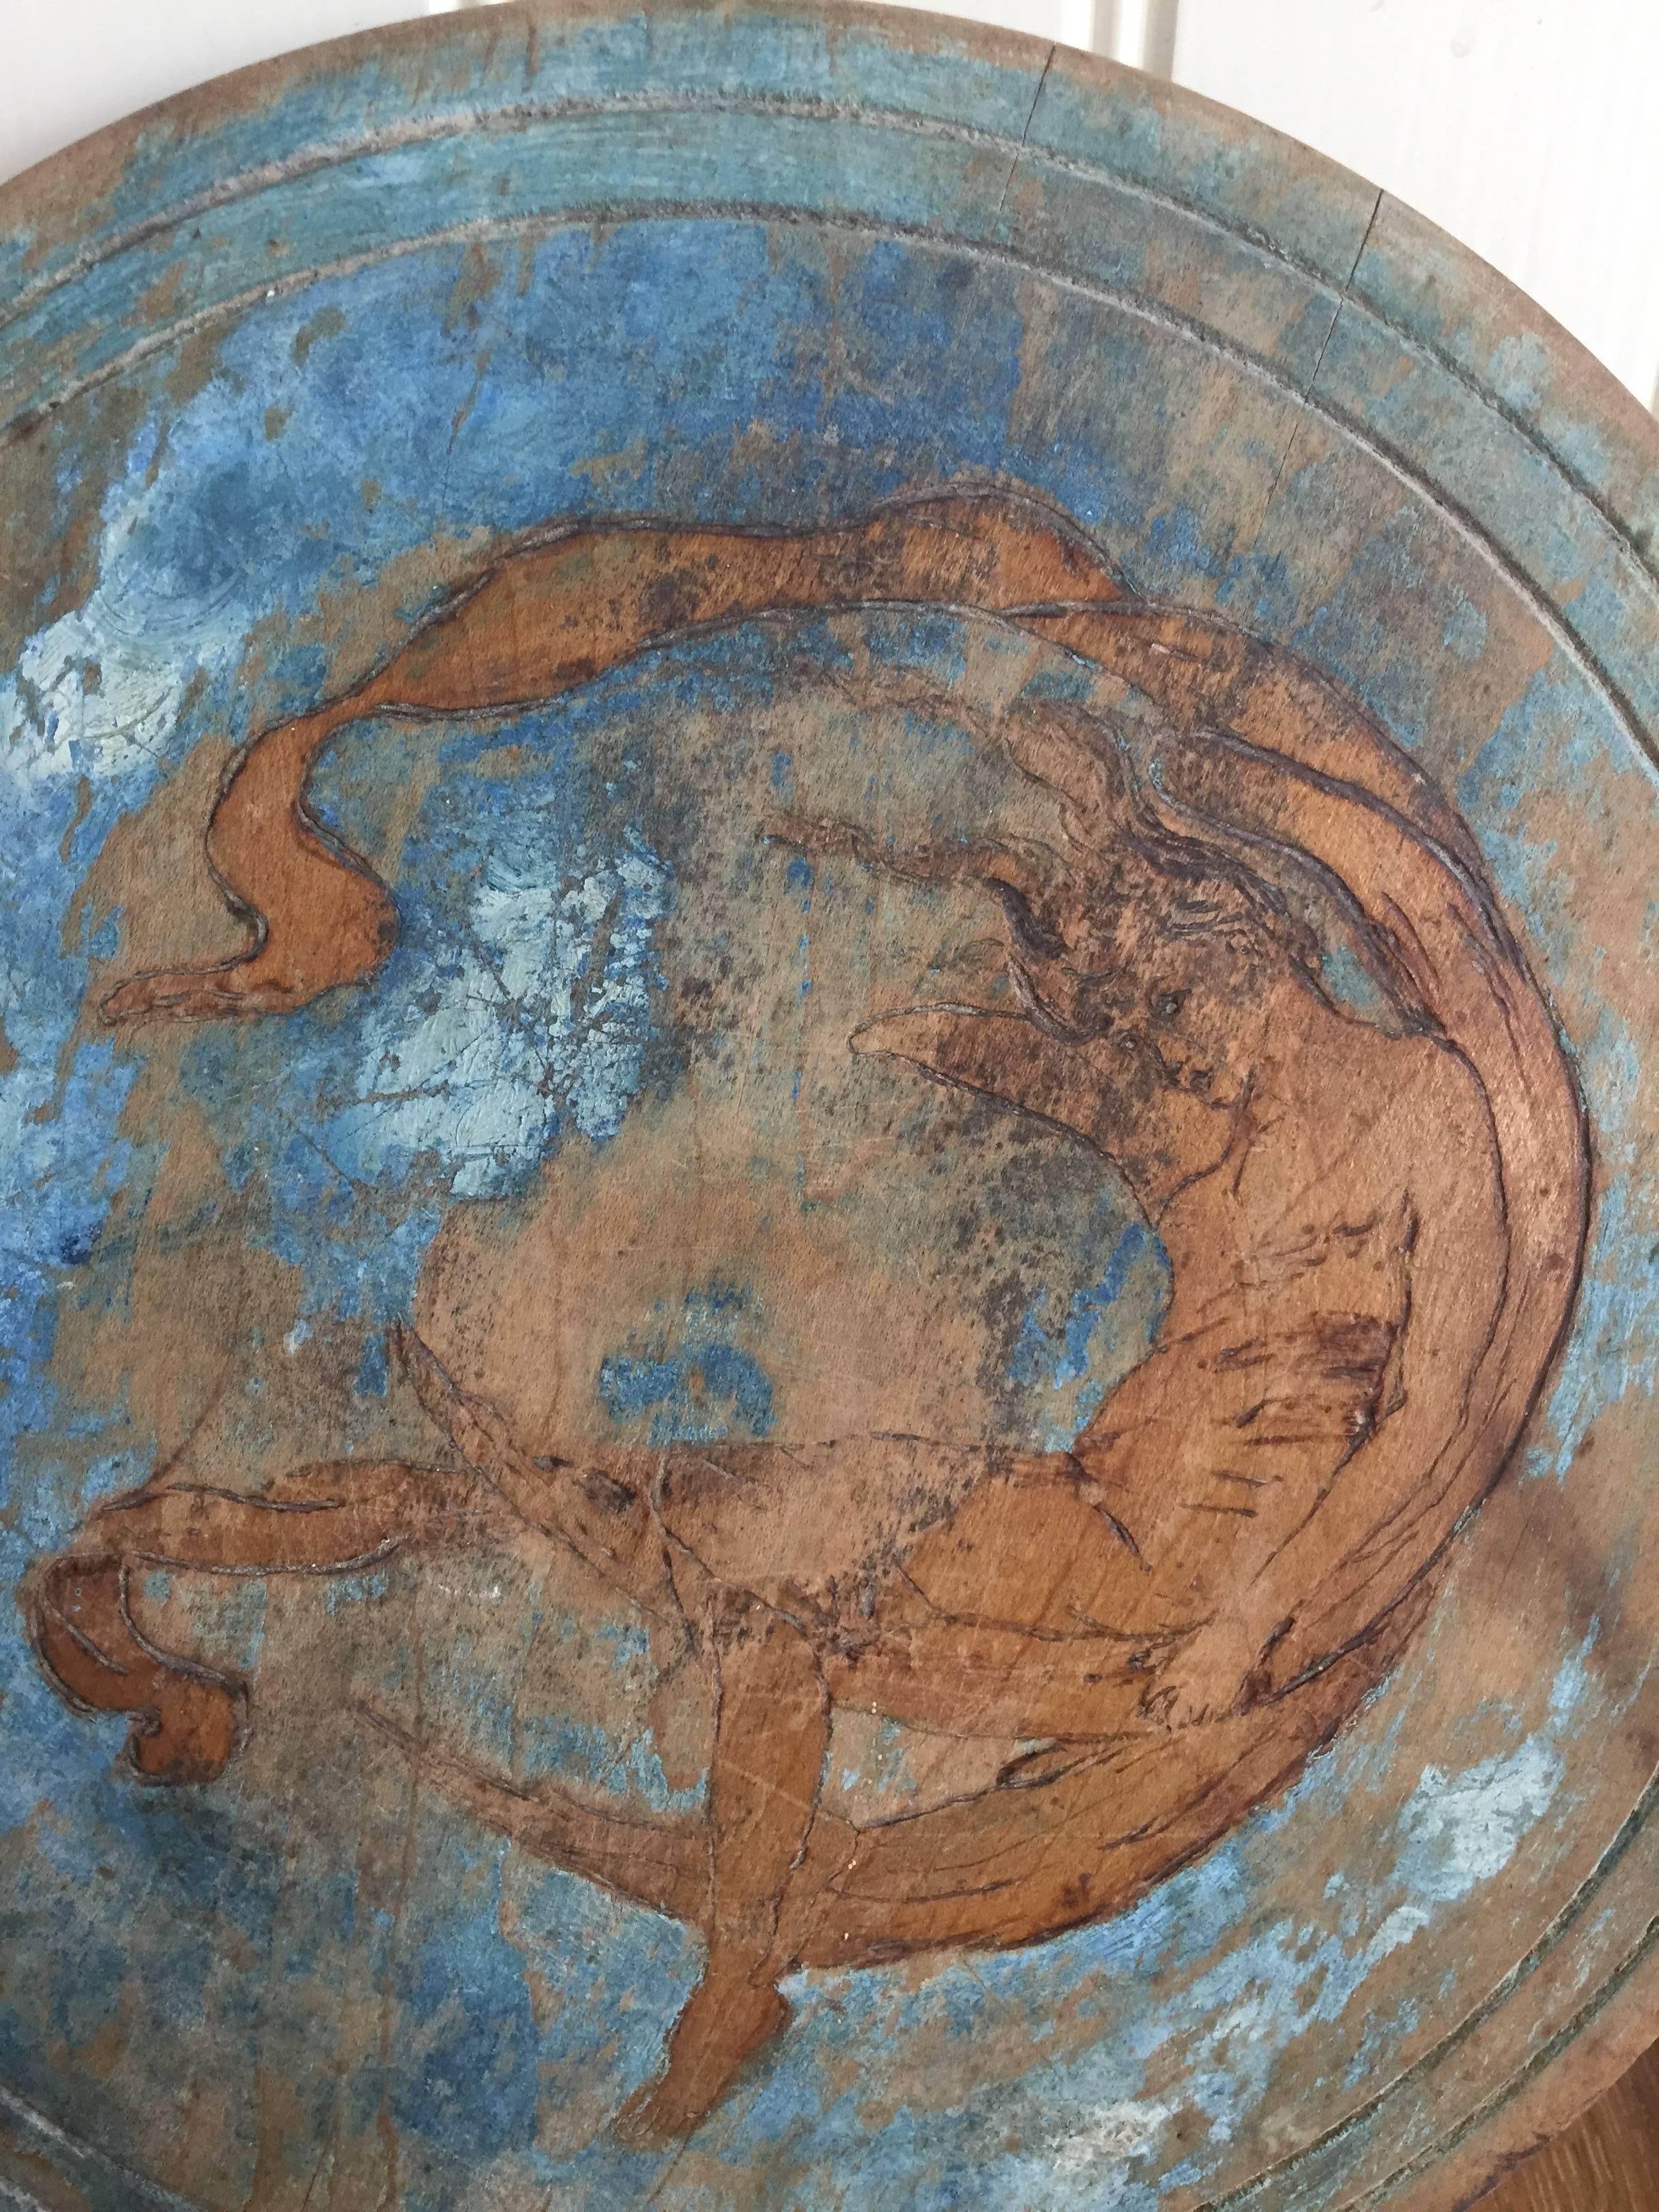 The image on this wooden lid, which conceivably could have been part of a butter or milk churn, has a distinctly Art Nouveau style. If you look at the close up of her face, and the movement of the entire image, it has the sophistication of that